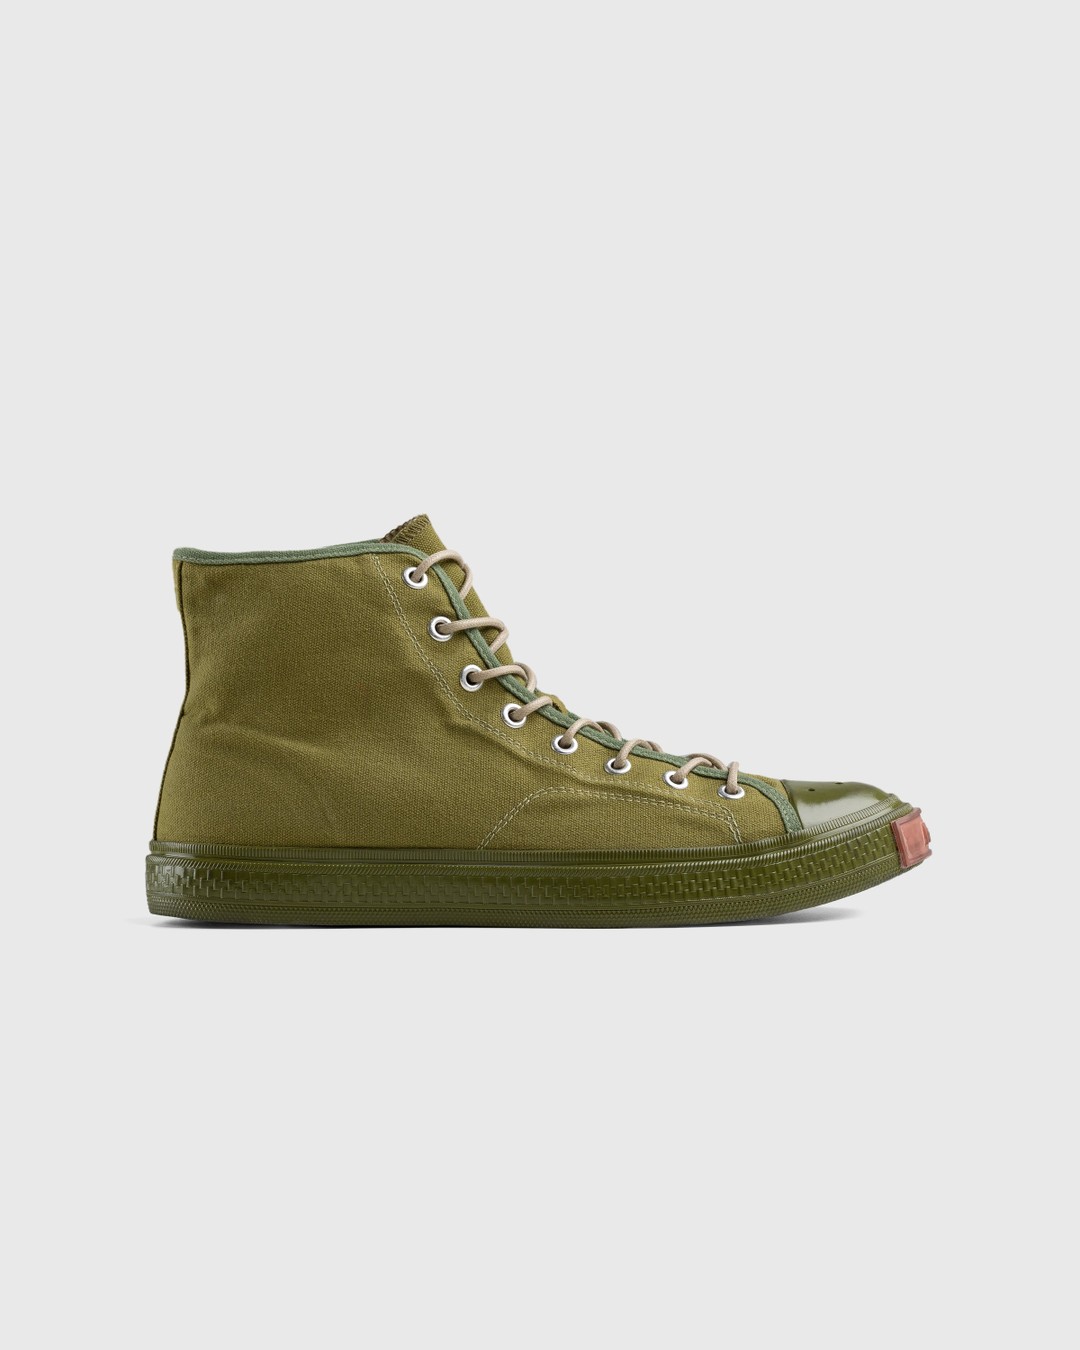 Acne Studios – Ballow High-Top Sneakers Olive Green - High Top Sneakers - Green - Image 1